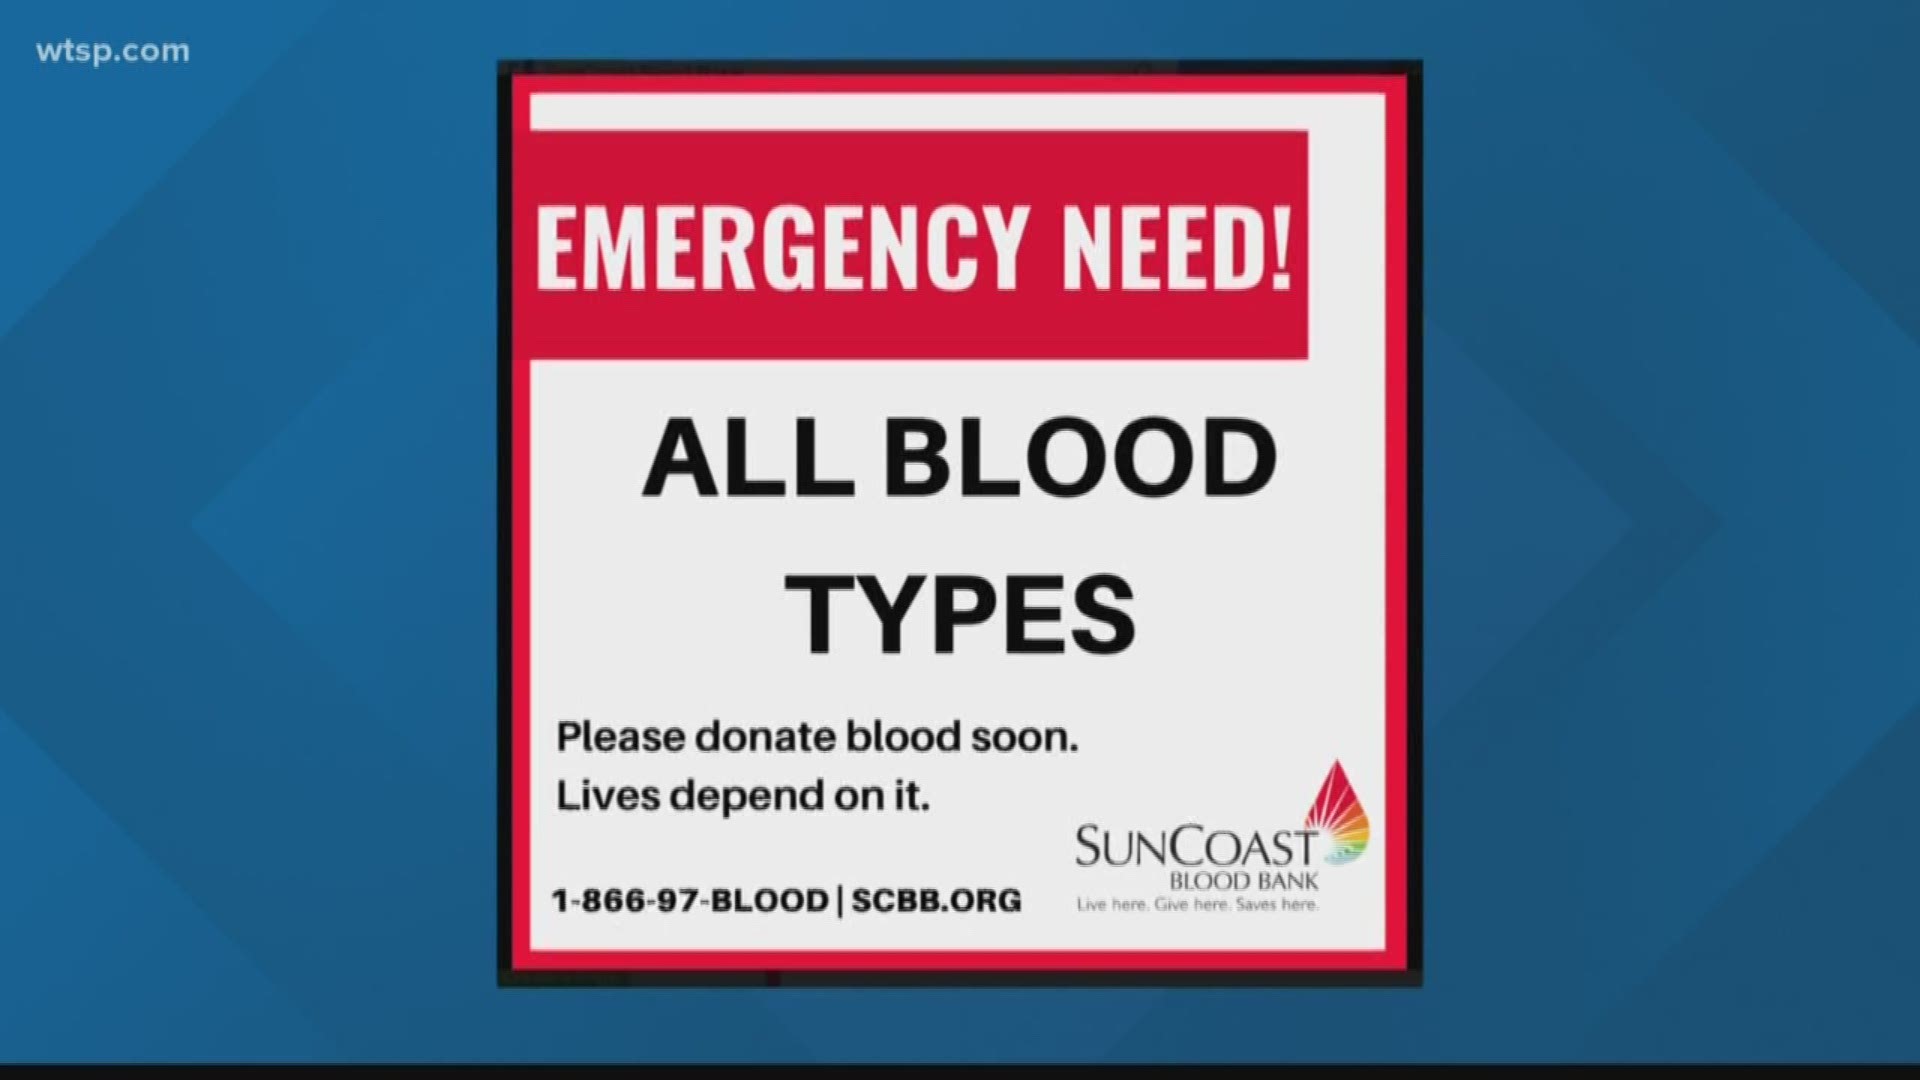 SunCoast Blood Bank says it has reached "extremely low and worrisome levels" of blood inventories.